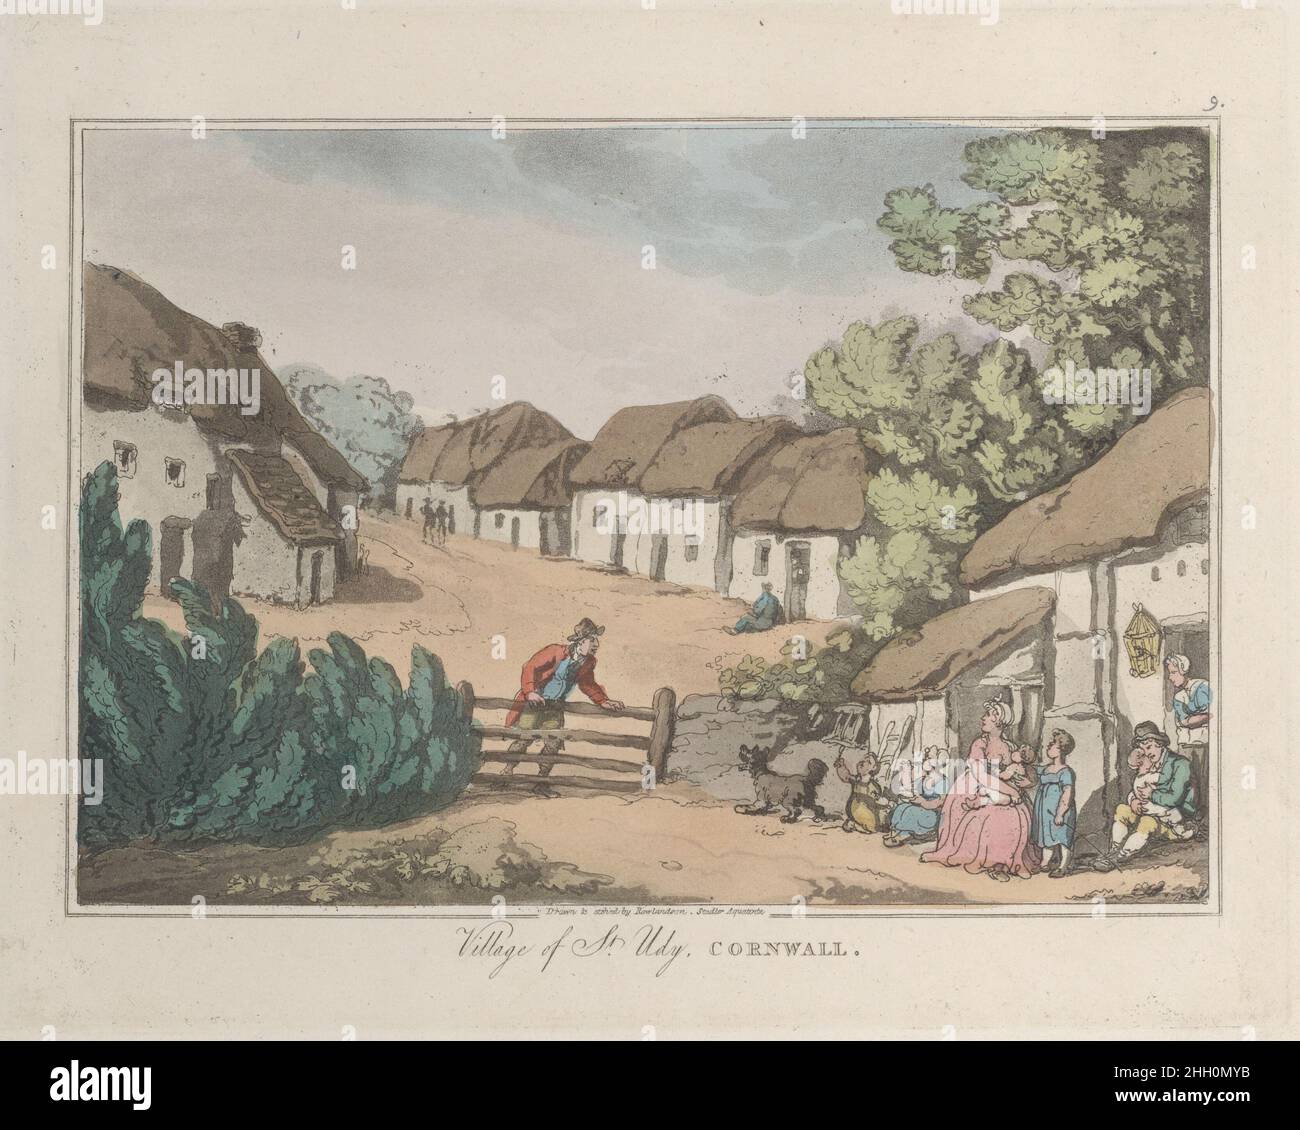 Village of St. Udy, Cornwall, from 'Sketches from Nature' 1822 Etched by Thomas Rowlandson. Village of St. Udy, Cornwall, from 'Sketches from Nature'. 'Sketches from Nature'. Etched by Thomas Rowlandson (British, London 1757–1827 London). 1822. Hand-colored etching and aquatint. Prints Stock Photo